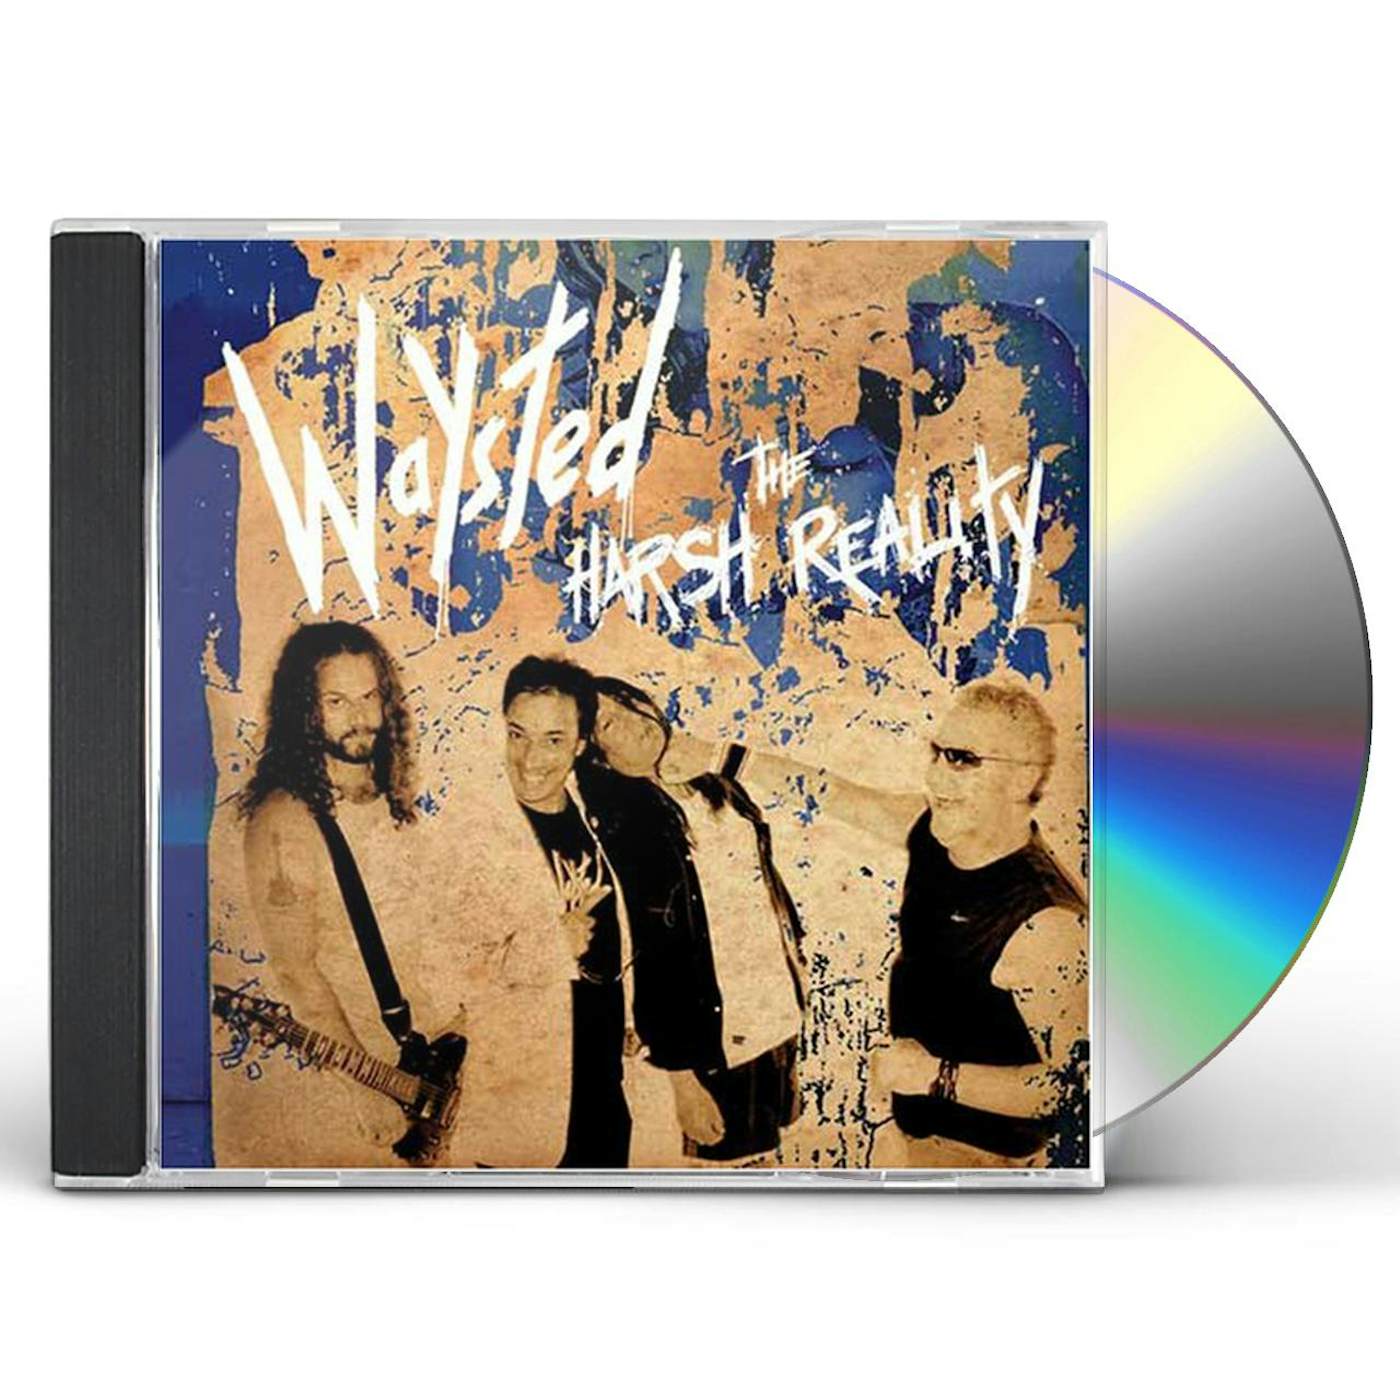 Waysted HARSH REALITY CD